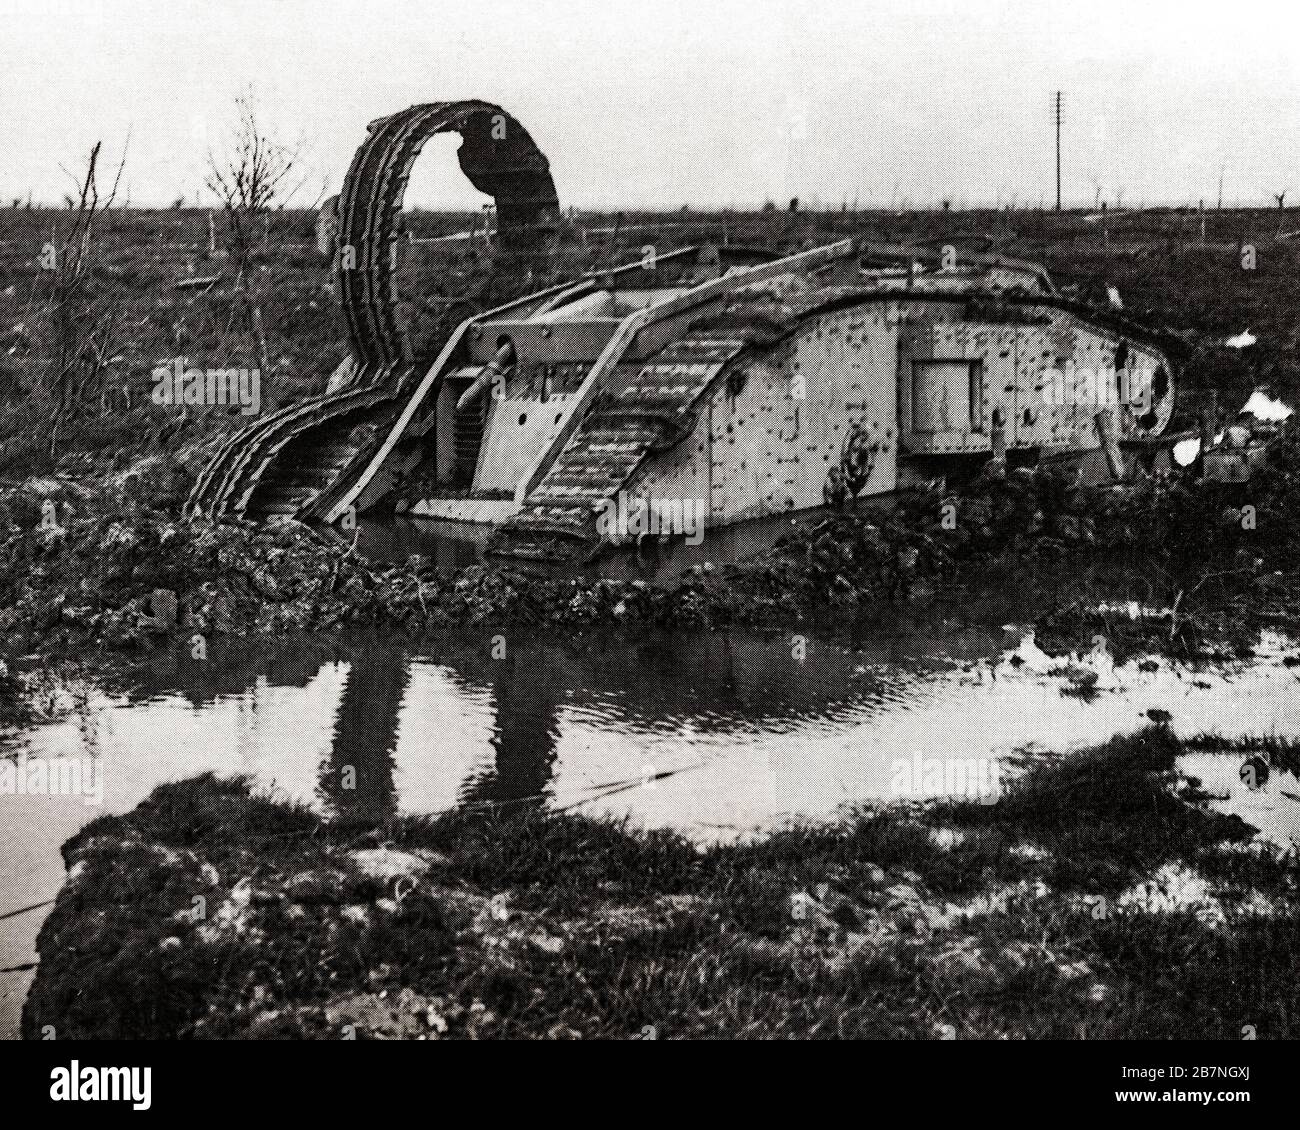 A British tank bogged down in the mud near St Julien, during the Third Battle of Ypres aka the Battle of Passchendaele, a campaign of the First World War, that took place on the Western Front, from July to November 1917, for control of the ridges south and east of the Belgian city of Ypres in West Flanders. Stock Photo